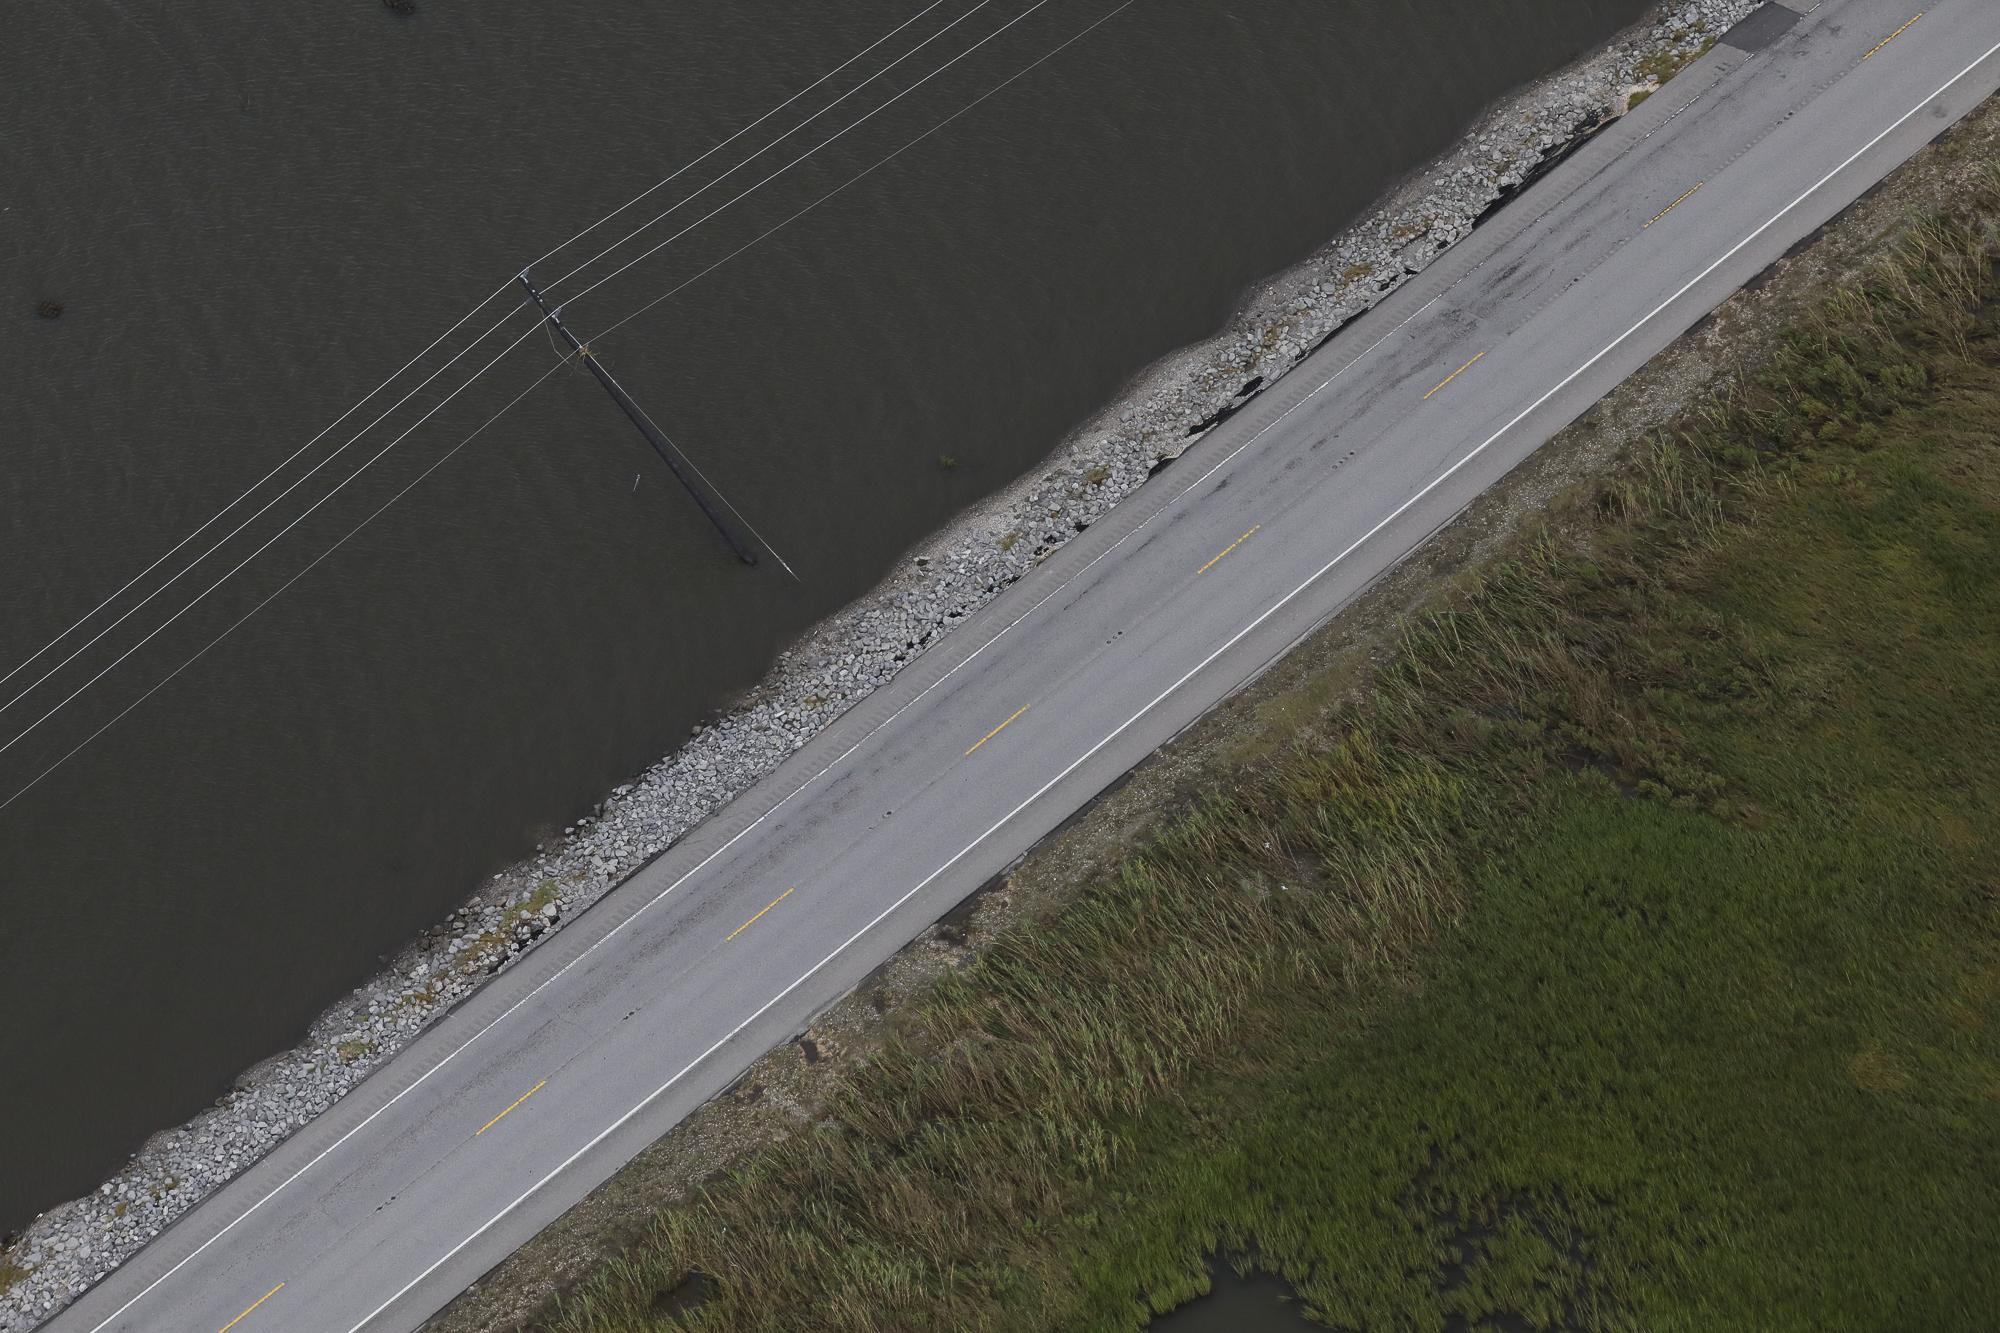 Hurricane Ida in Louisiana - An aerial view shows a destroyed utility pole and power...